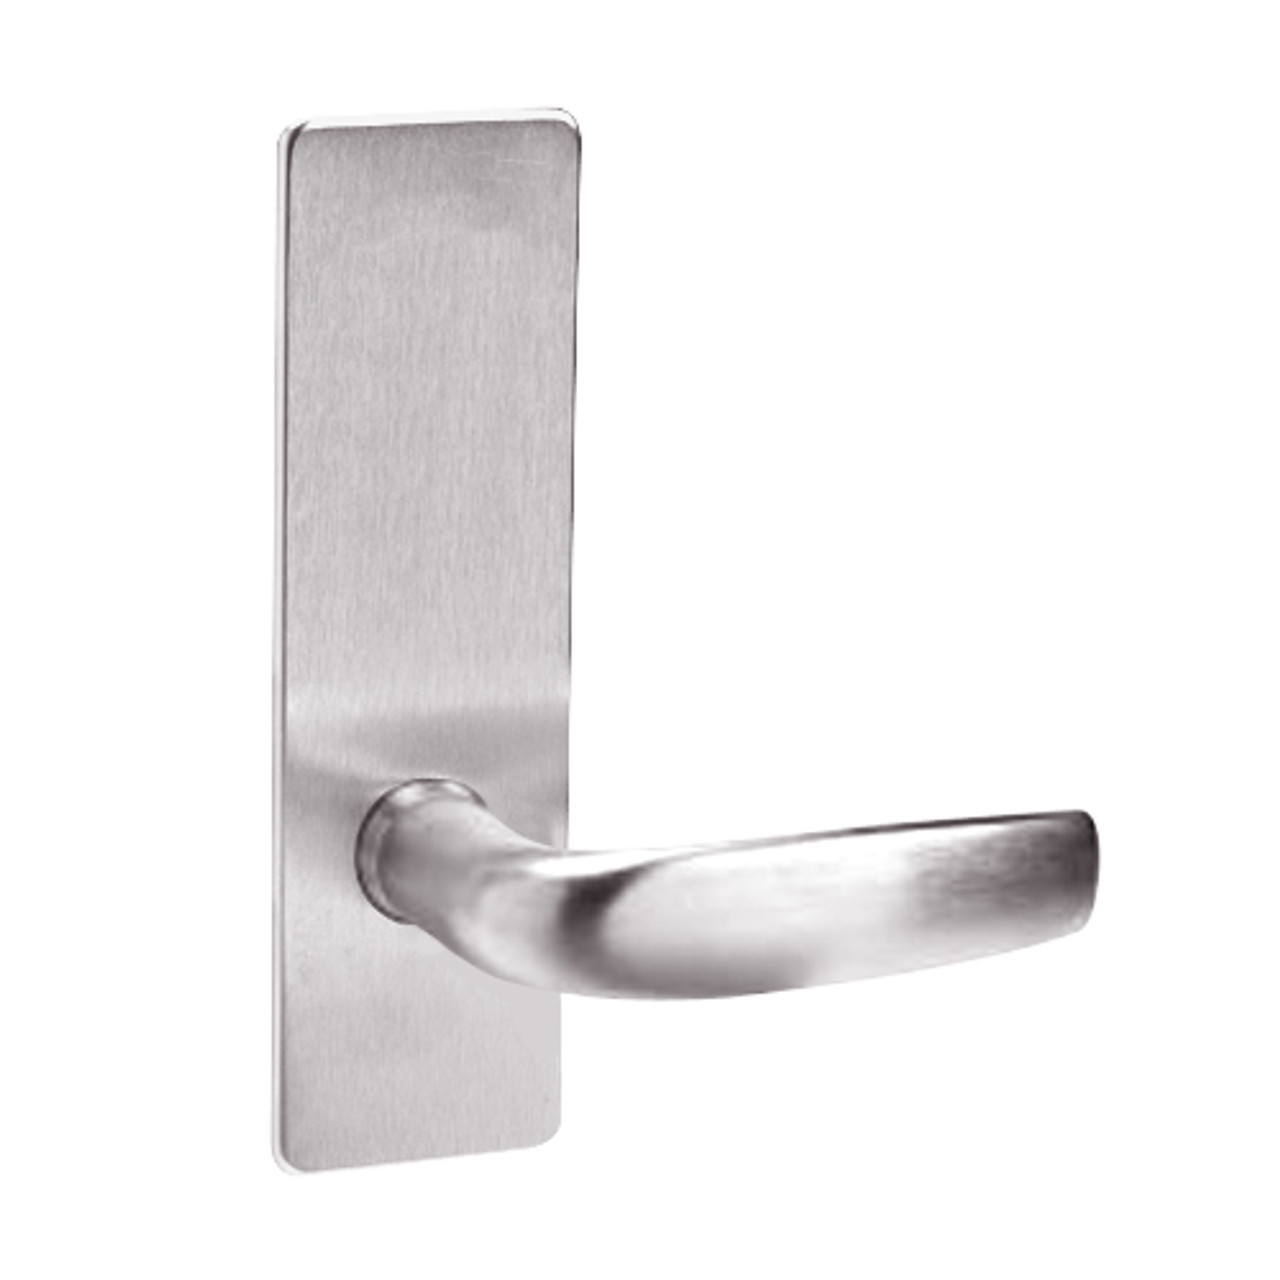 ML2030-CSP-629 Corbin Russwin ML2000 Series Mortise Privacy Locksets with Citation Lever in Bright Stainless Steel